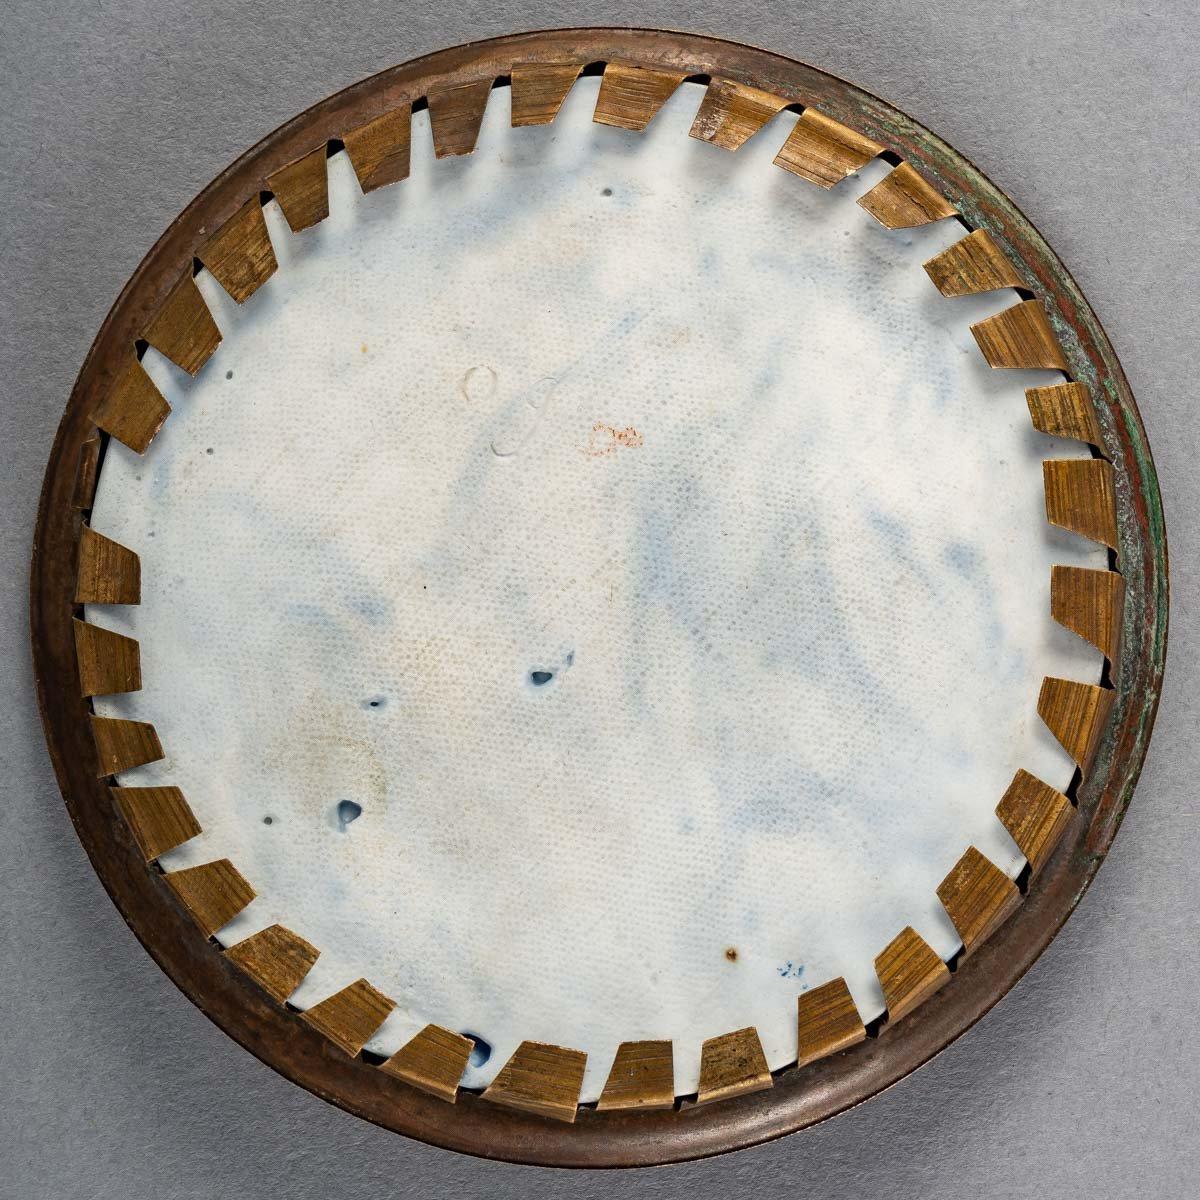 Medallion of the King of France Louis XVIII, in Sèvres Biscuit For Sale 2